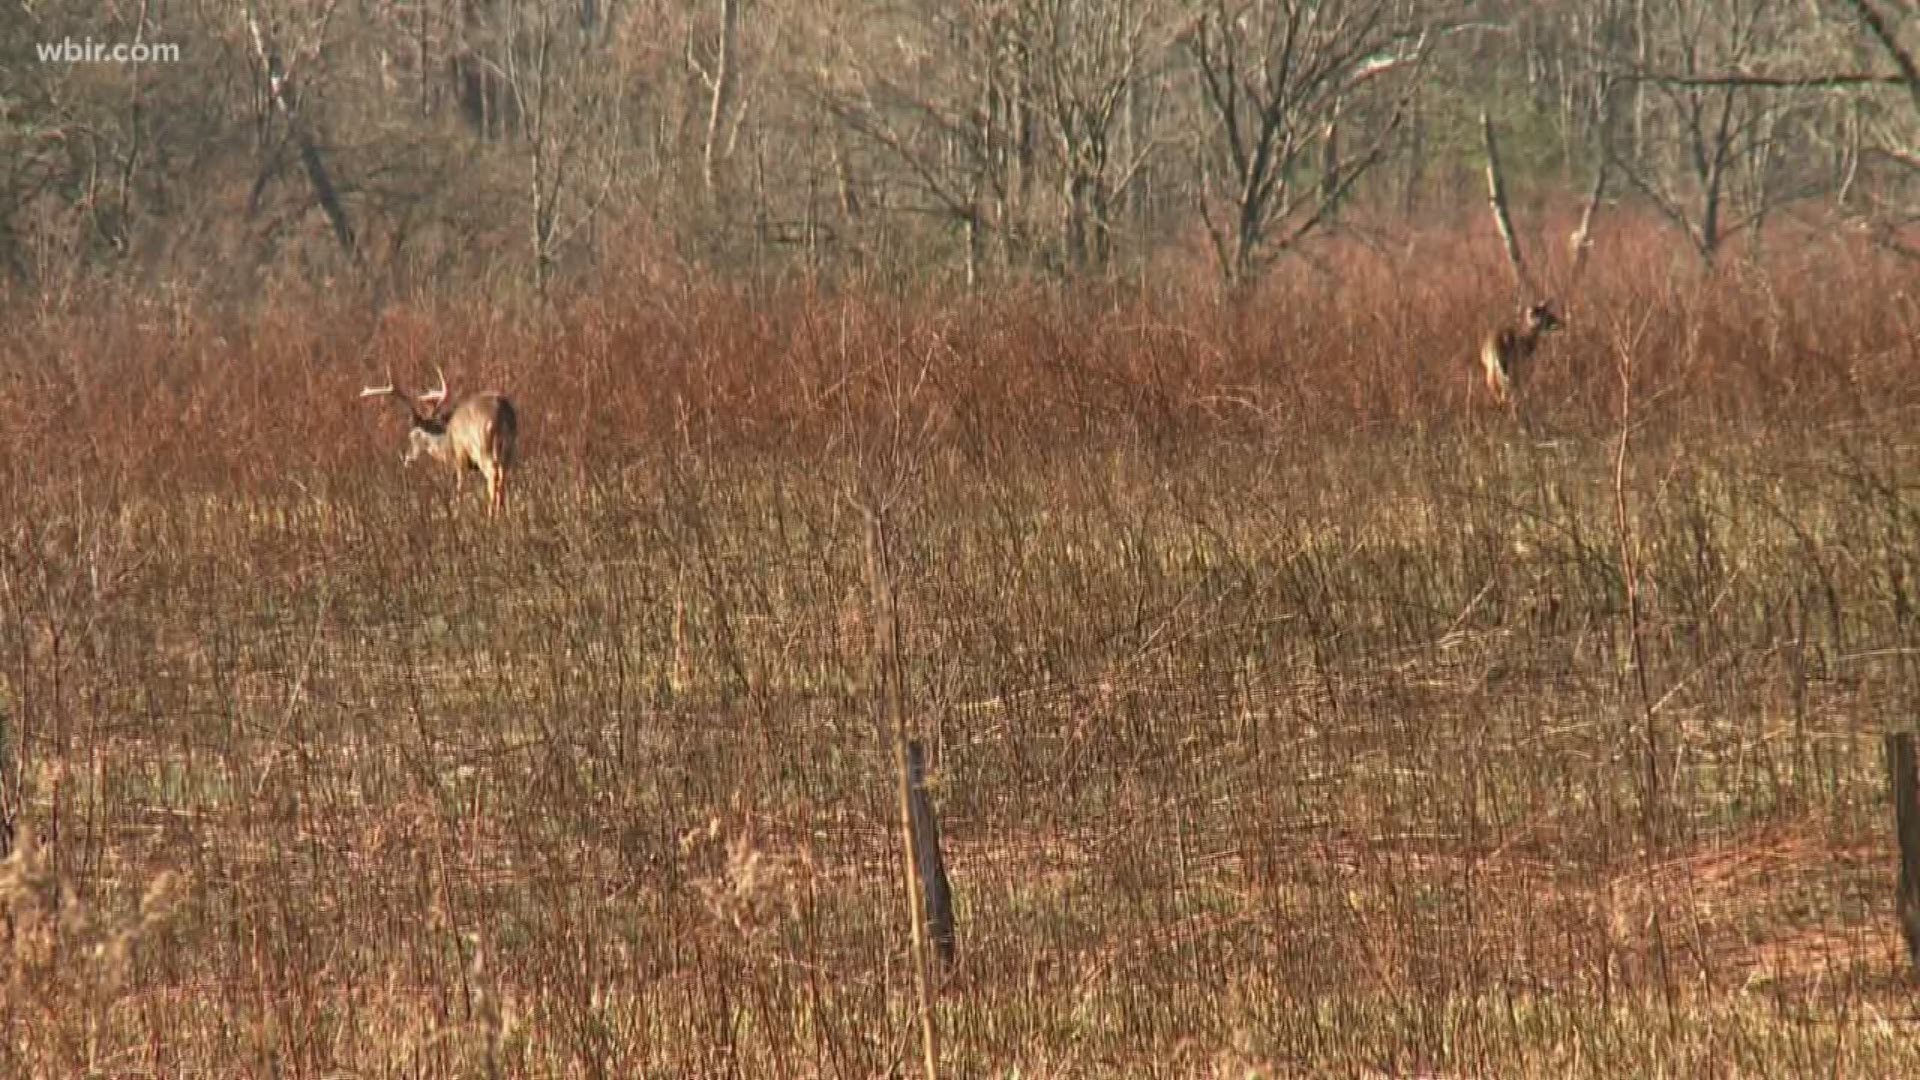 For hunters and conservationist, the spread of chronic wasting disease poses a threat to Tennessee's deer population.